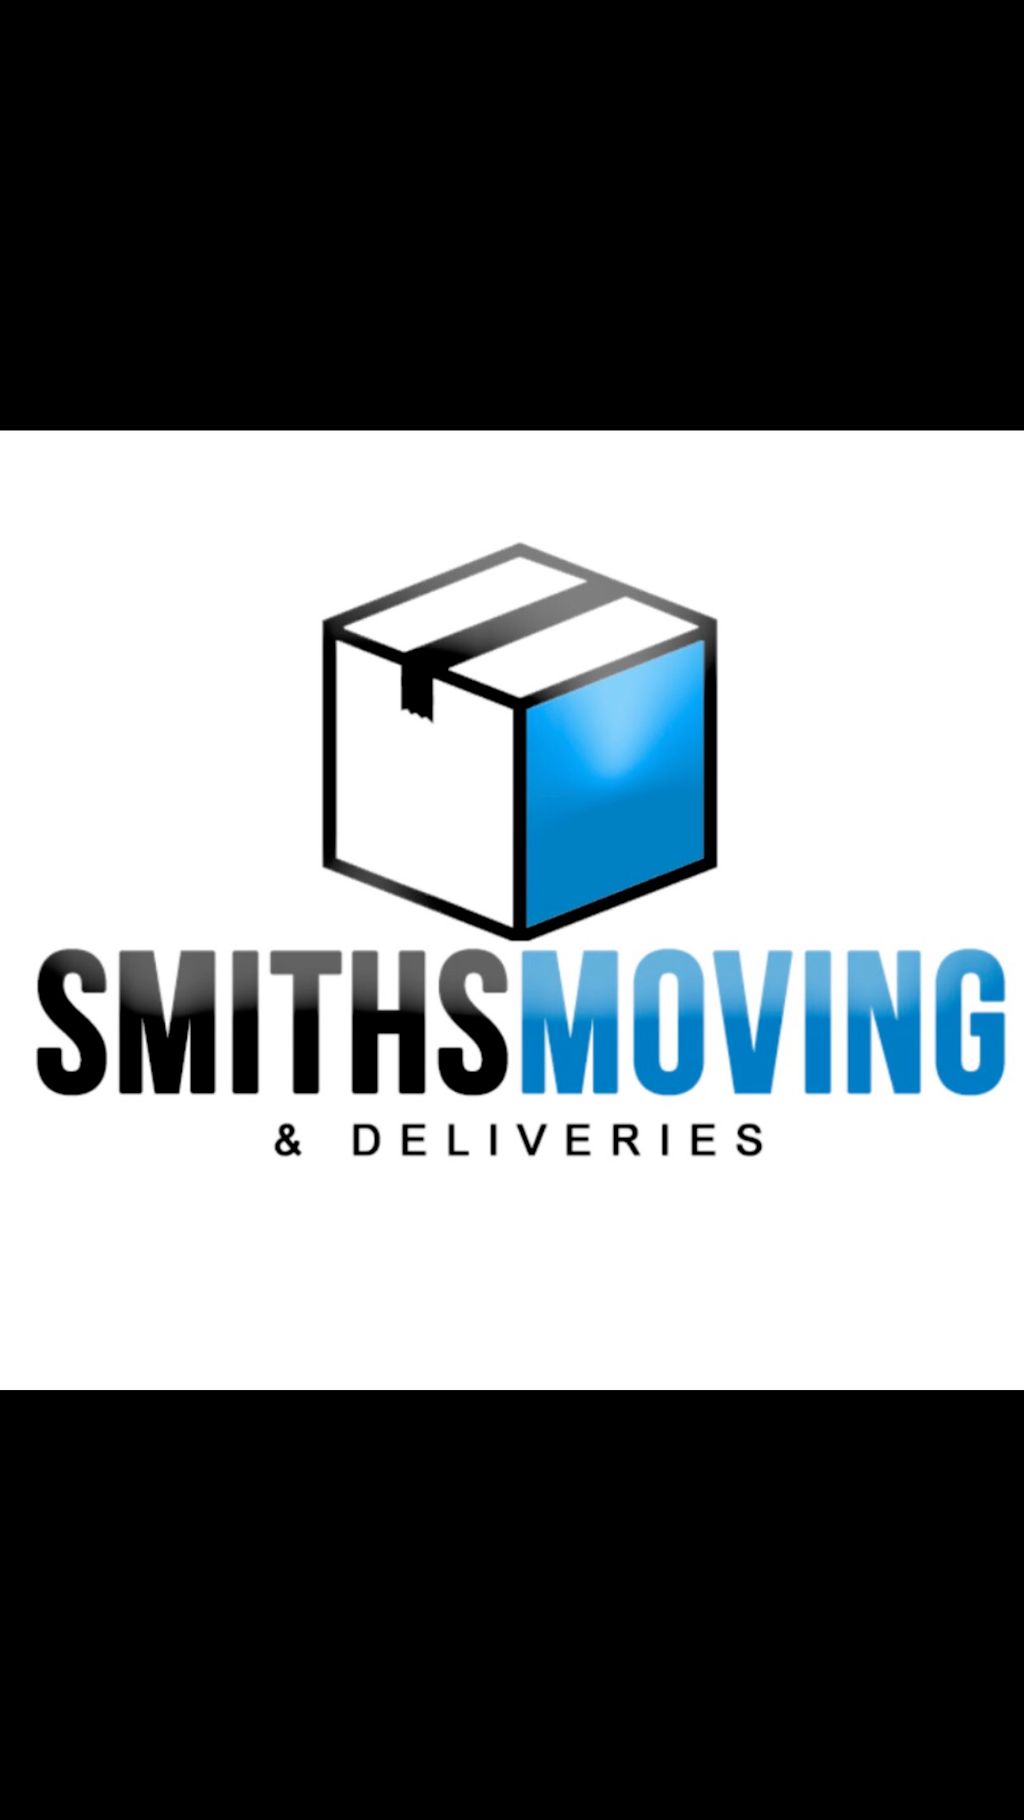 Smith's Moving & Painting